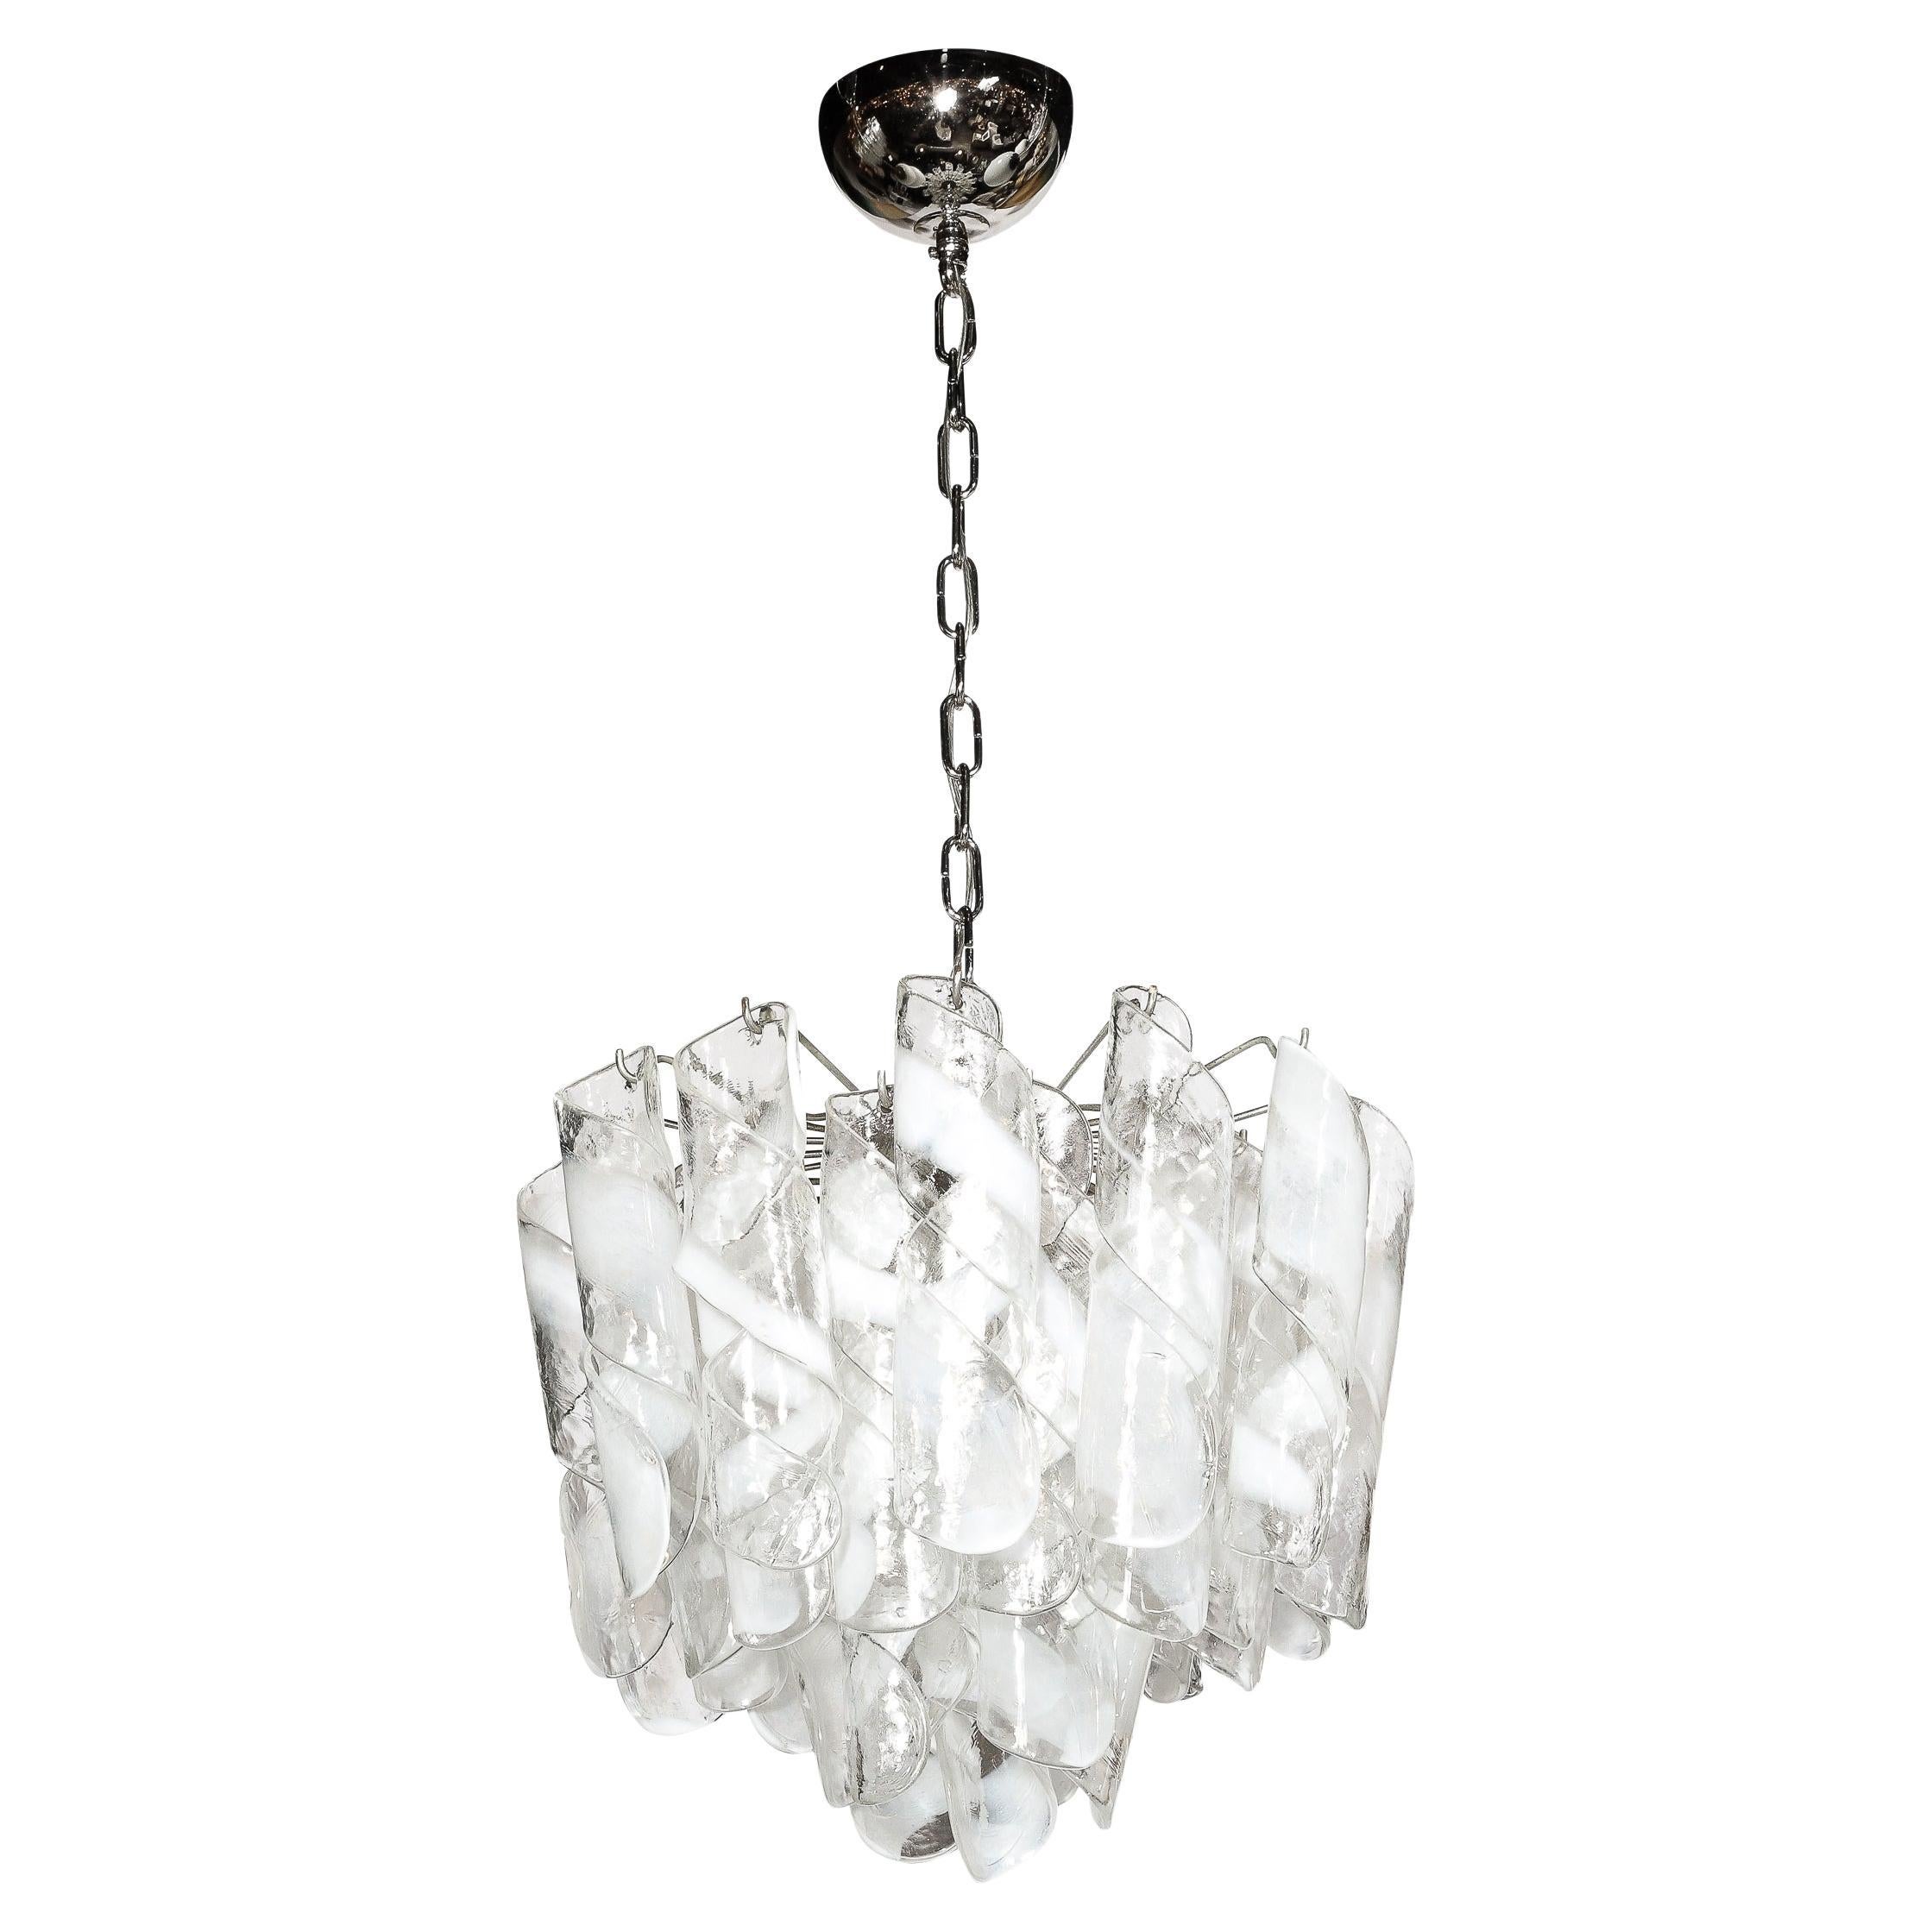 Mid-Century Modernist Hand-Blown Murano Glass Torciglioni Chandelier By Mazzega For Sale